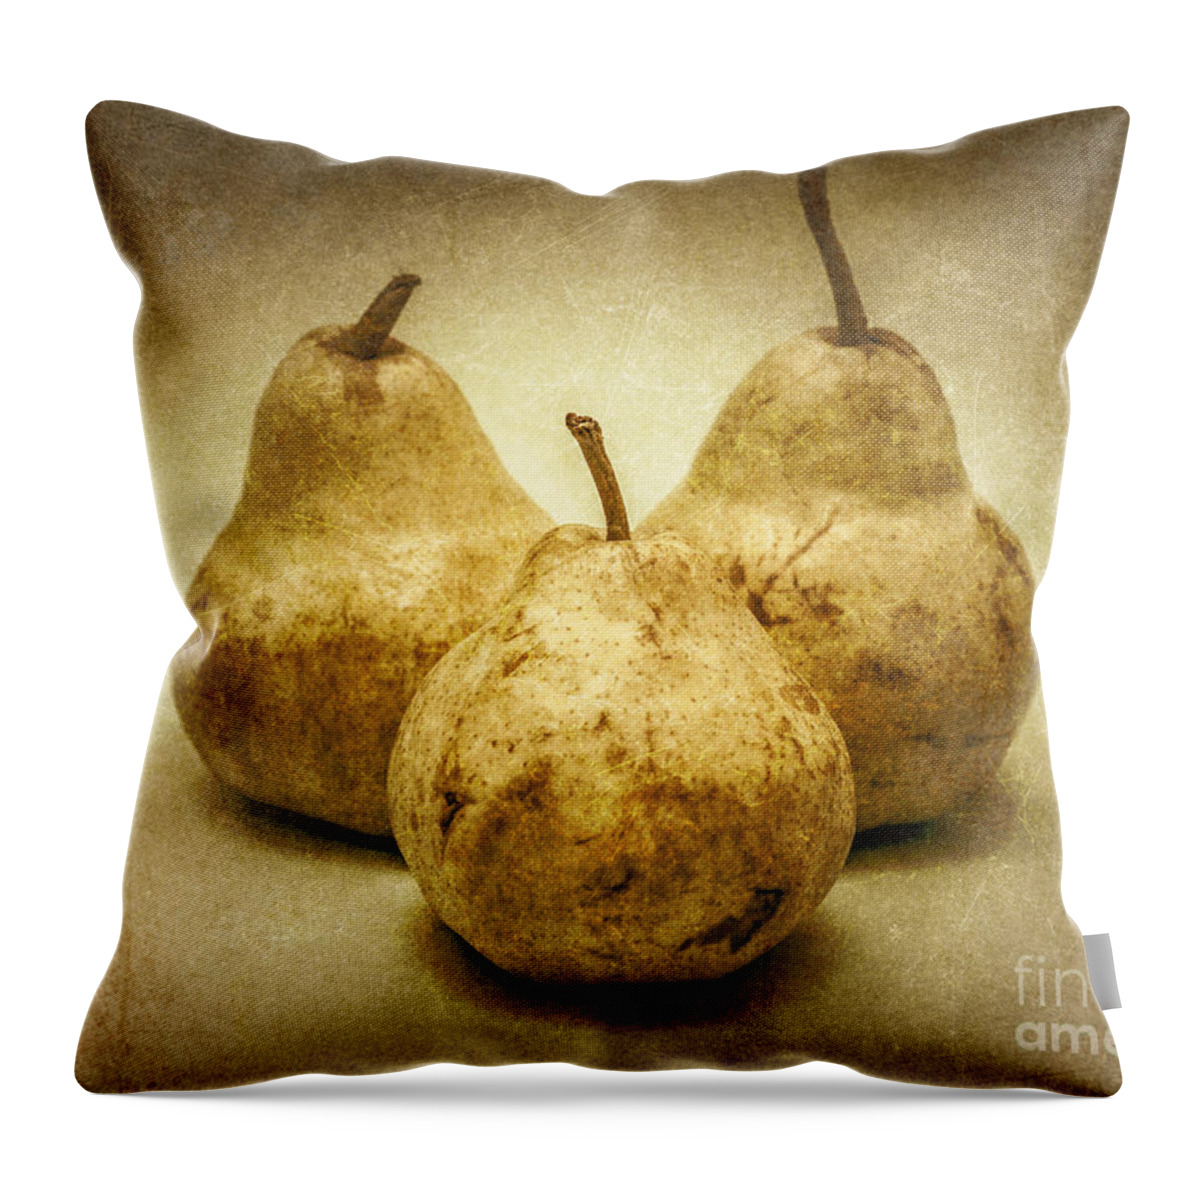 Pear Throw Pillow featuring the photograph One Pair Too Many by Jorgo Photography